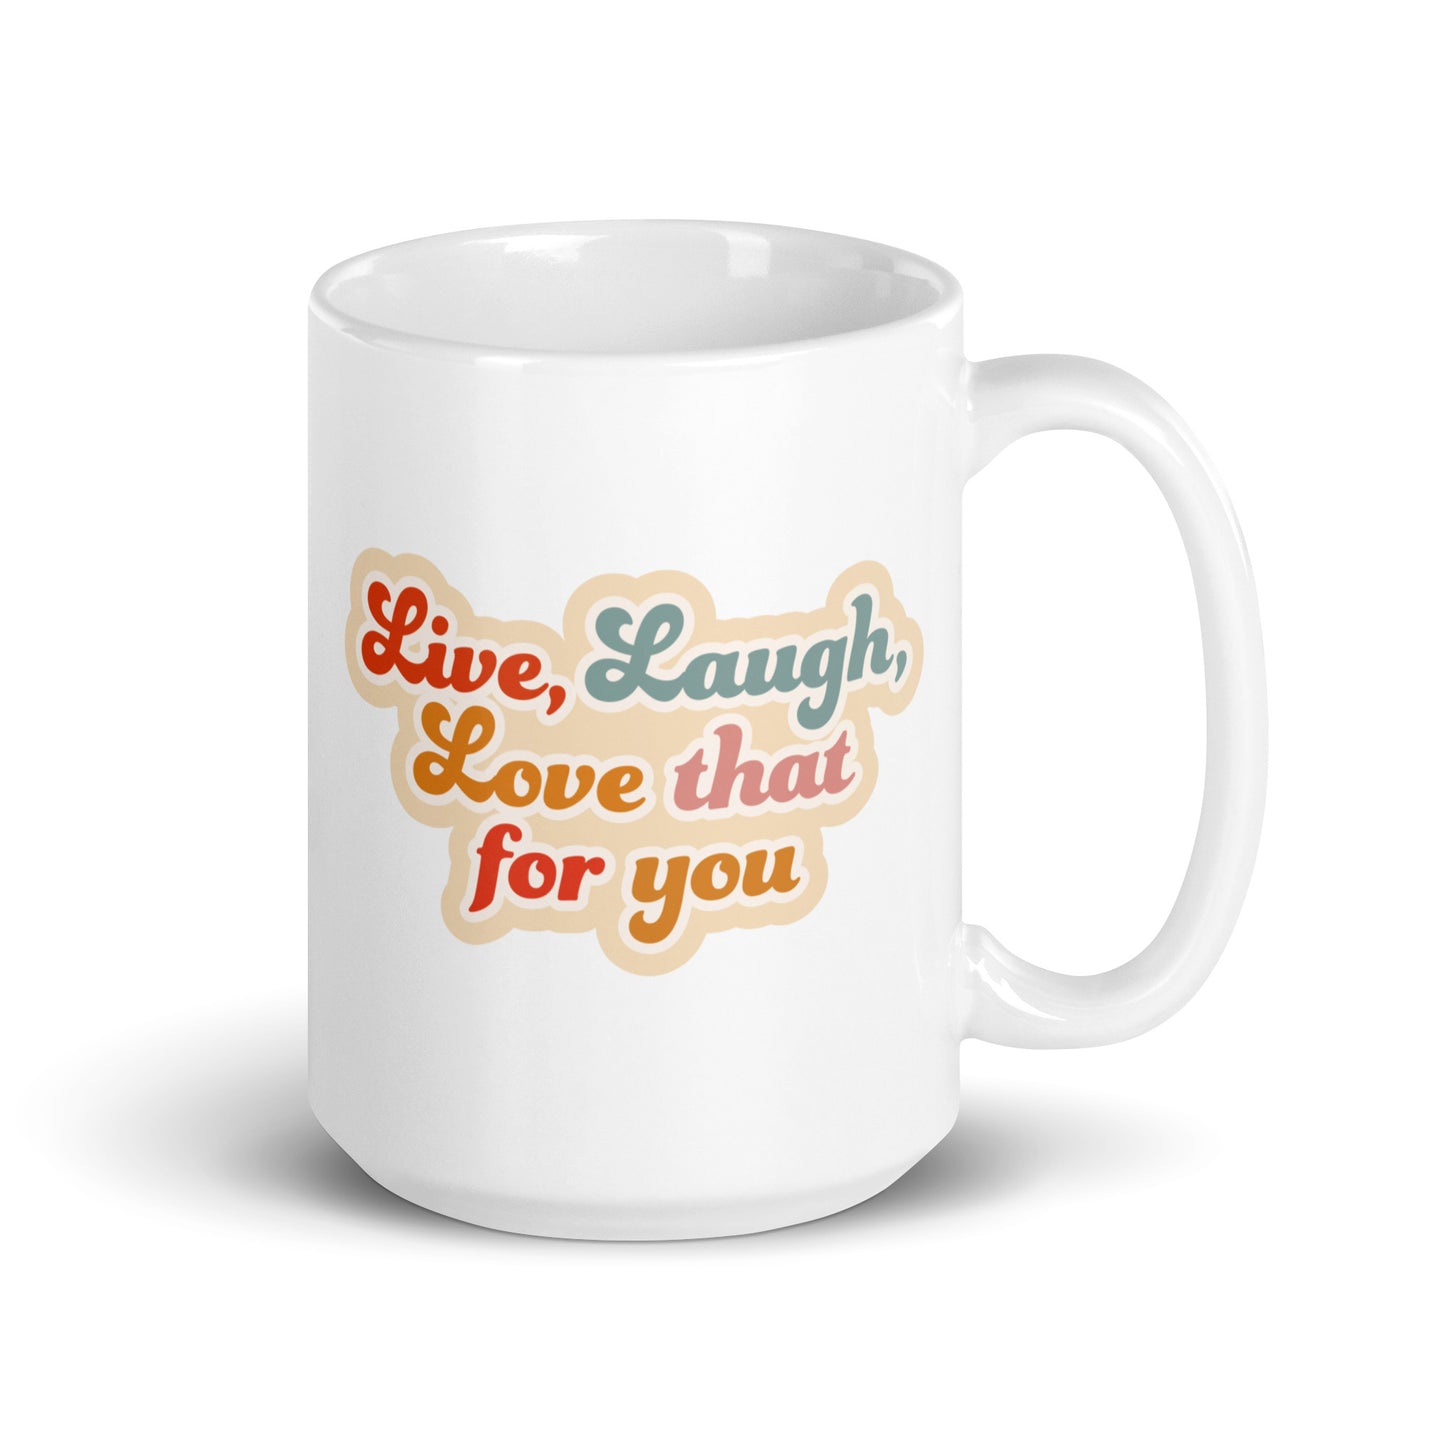 A white 15 ounce cereamic coffee mug featuring colorful, cursive text that reads "Live, Laugh, Love that for you."